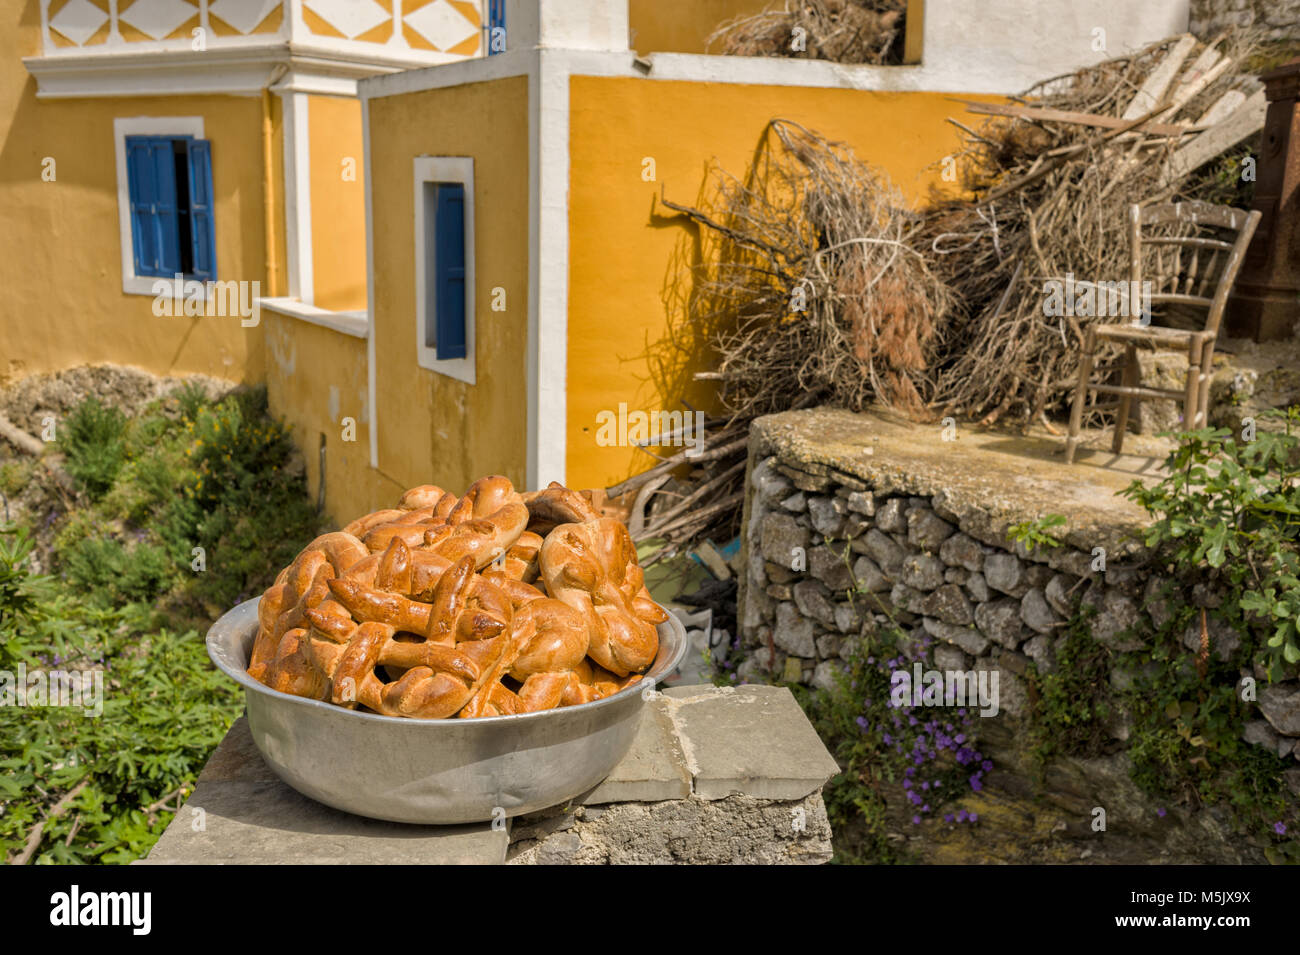 Greece, Aegean Islands, Karpathos island, to make bread is one of the main activities of the women of Olympos village Stock Photo